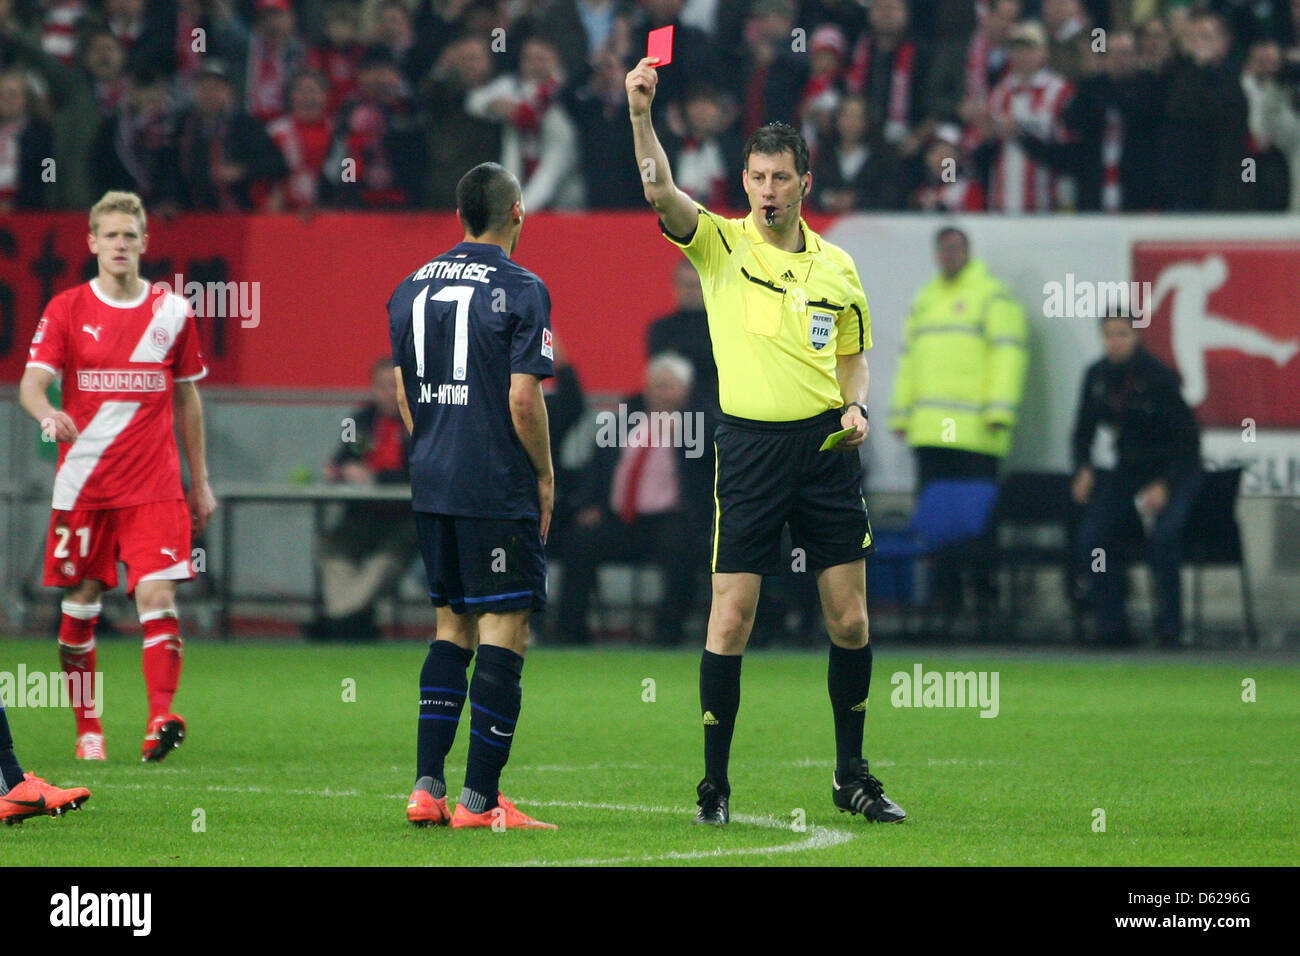 Referee Wolfgang Stark (R) shows Berlin's Anis Ben-Hatira the red card during the Bundesliga relegation soccer match between Fortuna Duesseldorf and Hertha BSC at the Esprit-Arena in Duesseldorf, Germany, 15 May 2012. Photo: Revierfoto Stock Photo